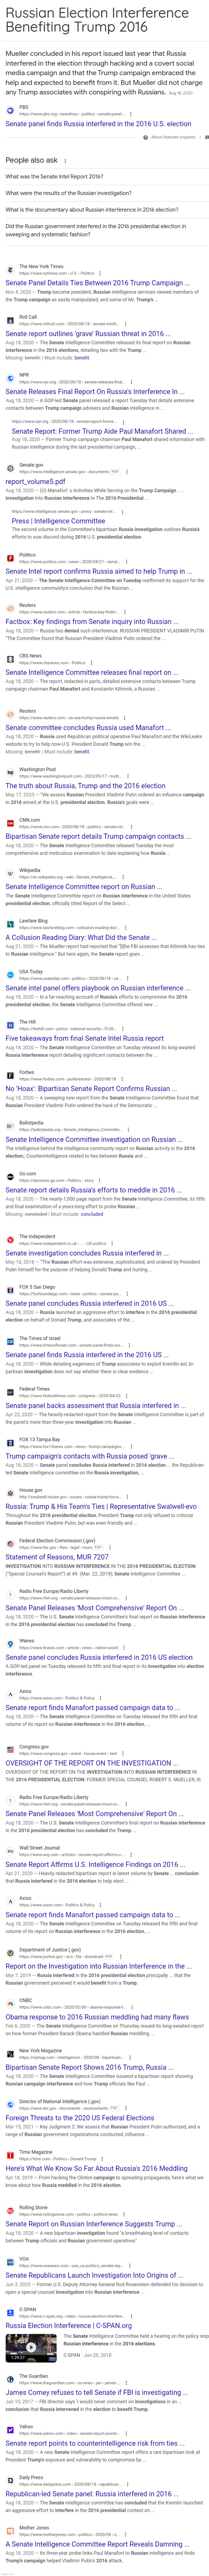 Russian Election Interference Benefiting Trump 2016 | Russian Election Interference
Benefiting Trump 2016 | image tagged in trump,russian election interference benefiting trump 2016,donald trump,russian collusion,trump articles,trump collusion | made w/ Imgflip meme maker